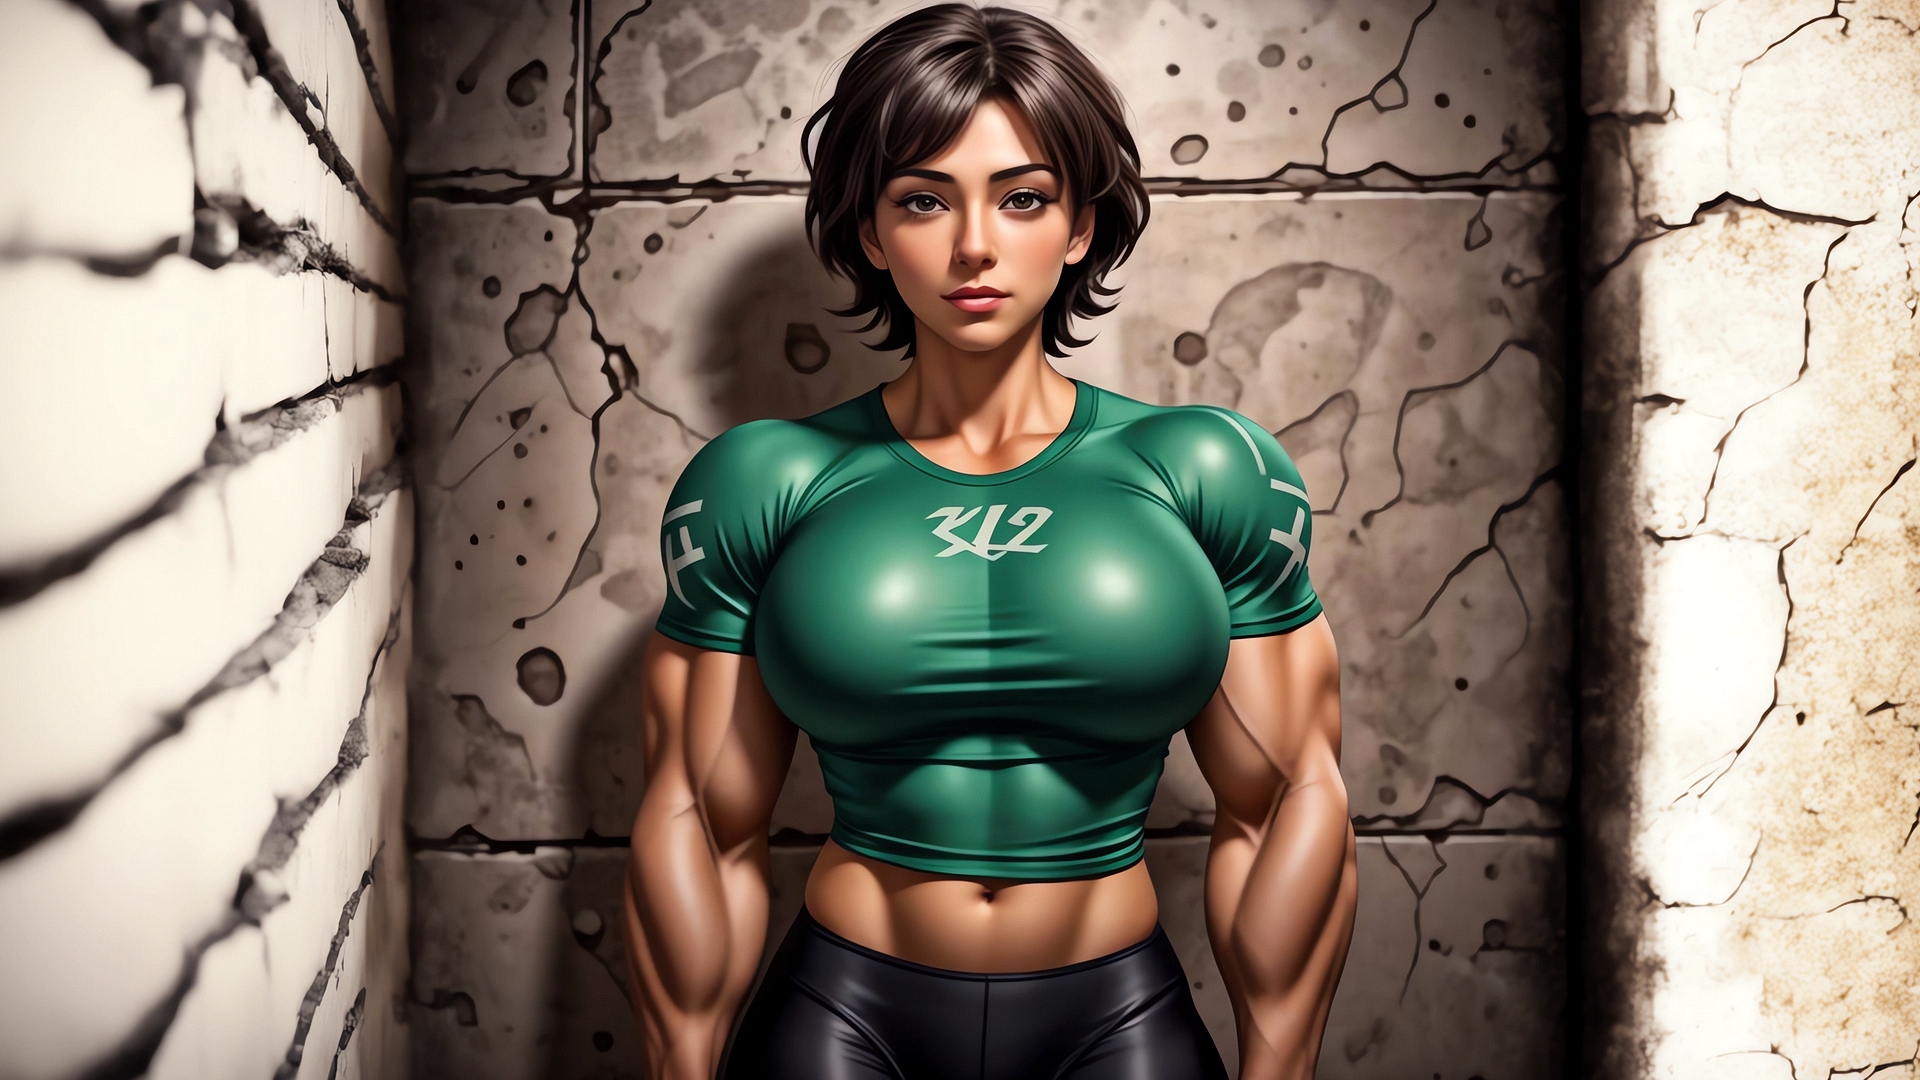 A girl bodybuilder in a green T-shirt standing against the wall